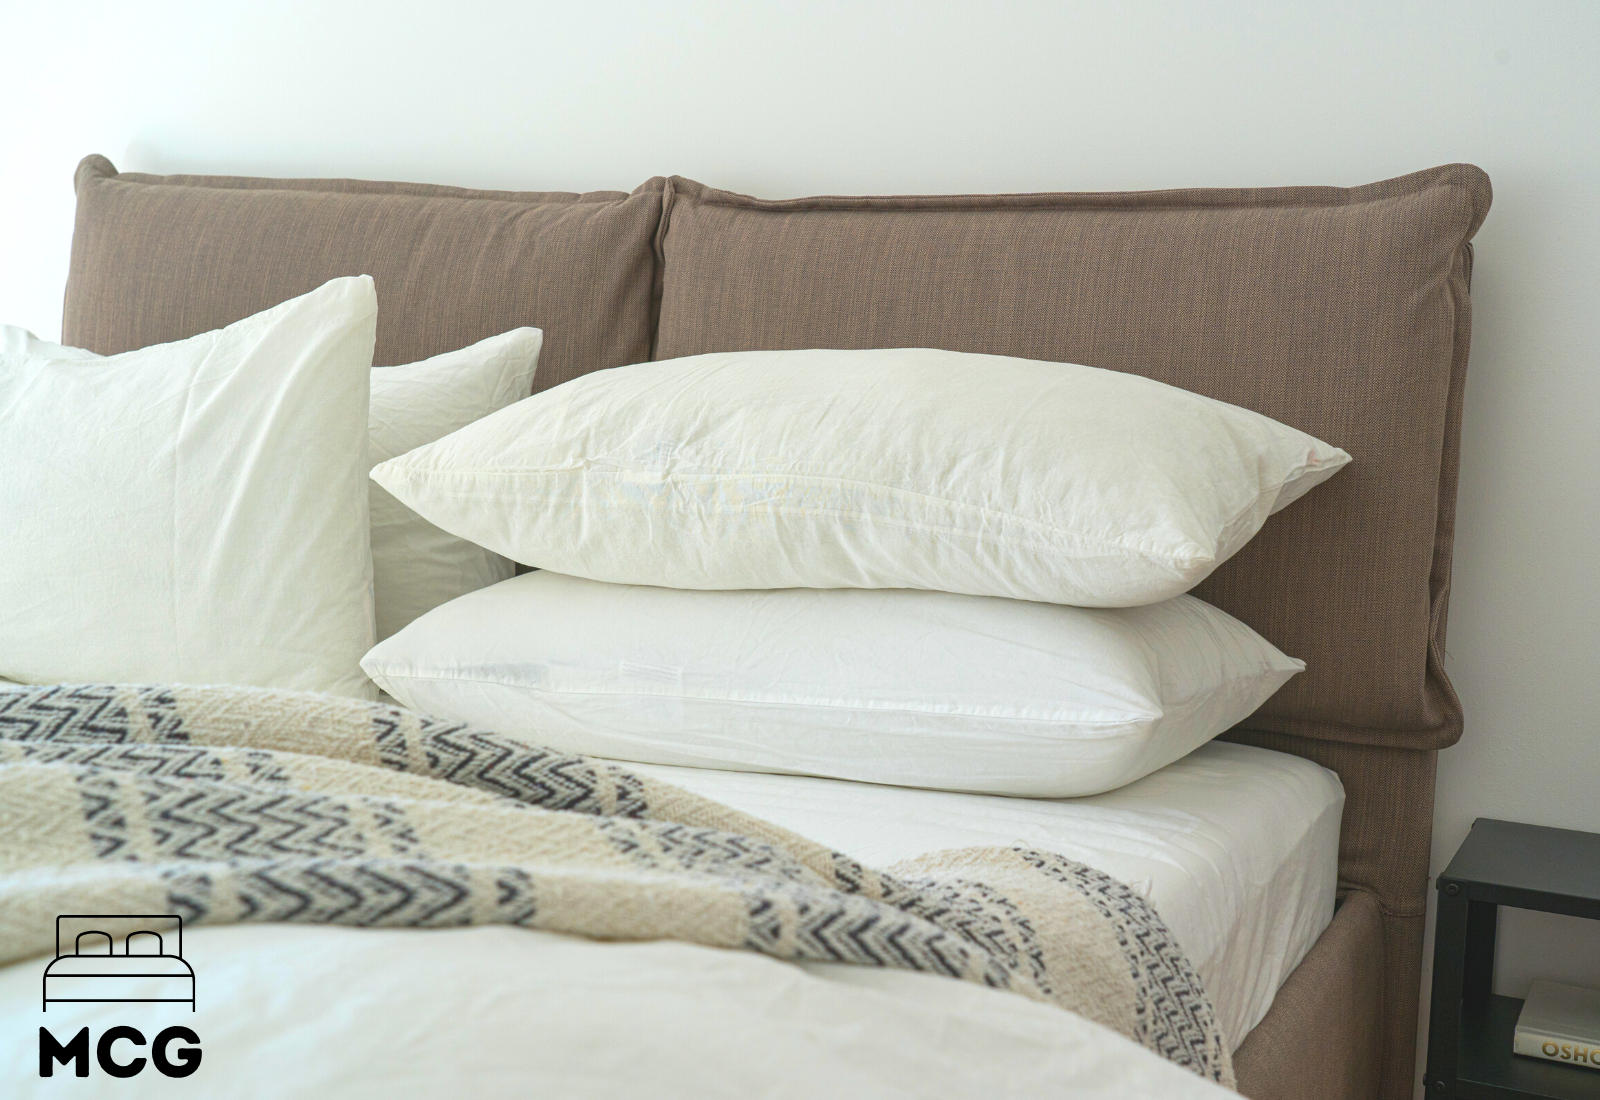 stack of pillows on a bed